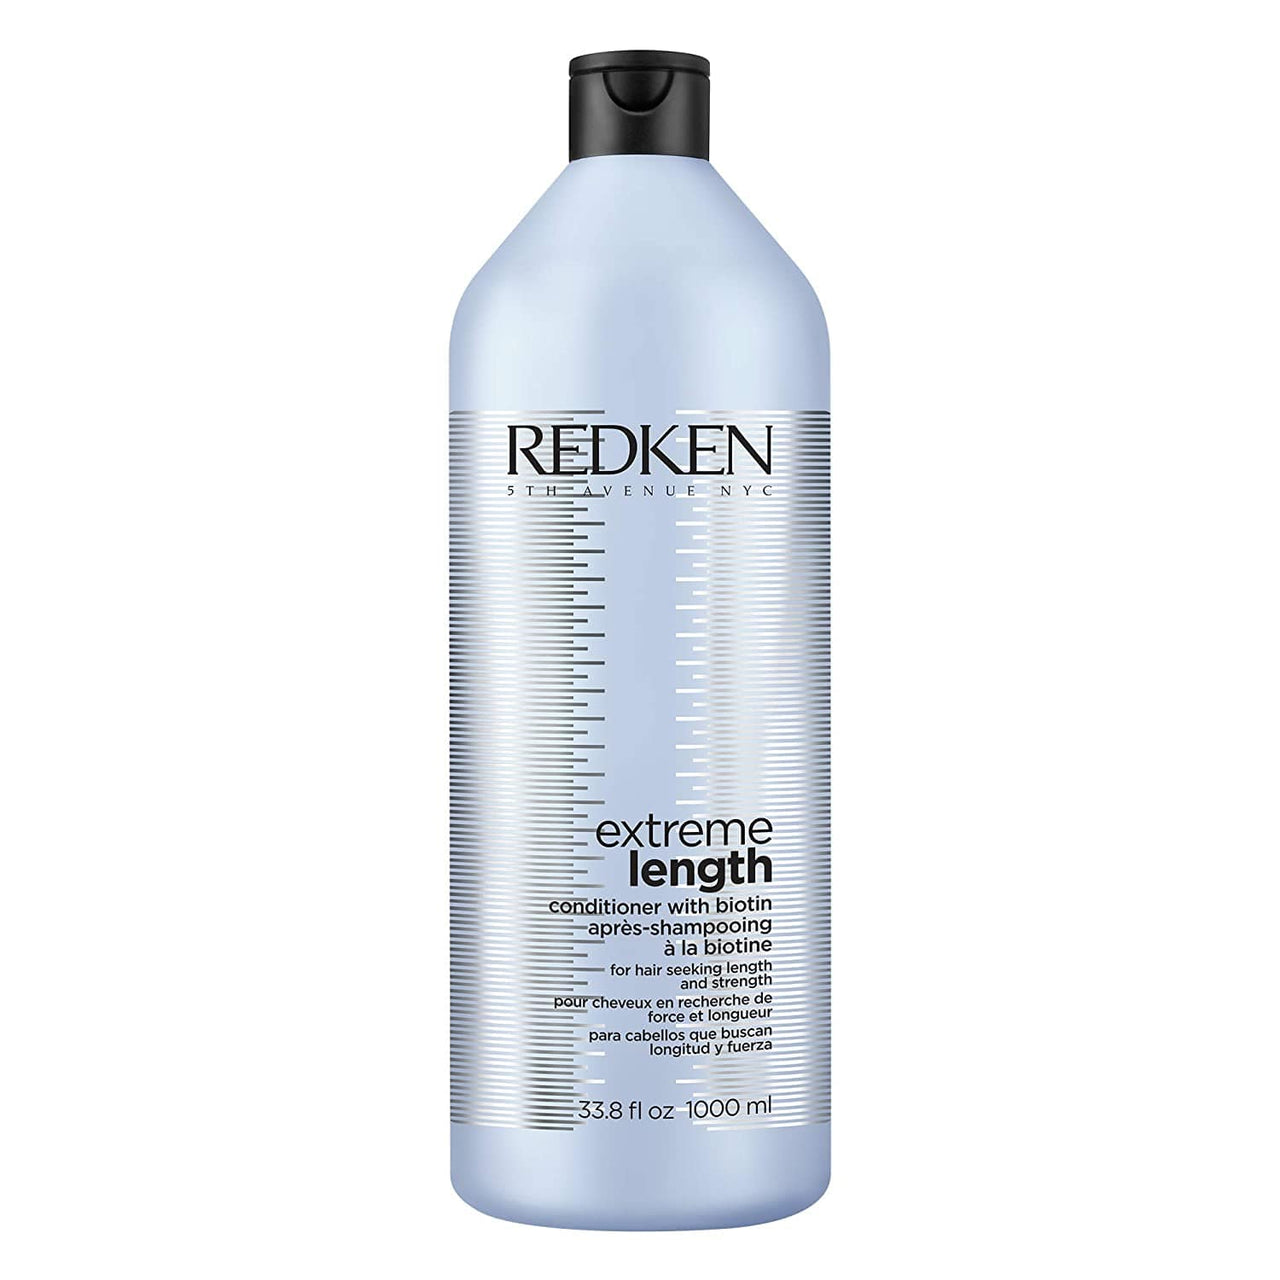 REDKEN_Redken Extreme Length Conditioner_Cosmetic World